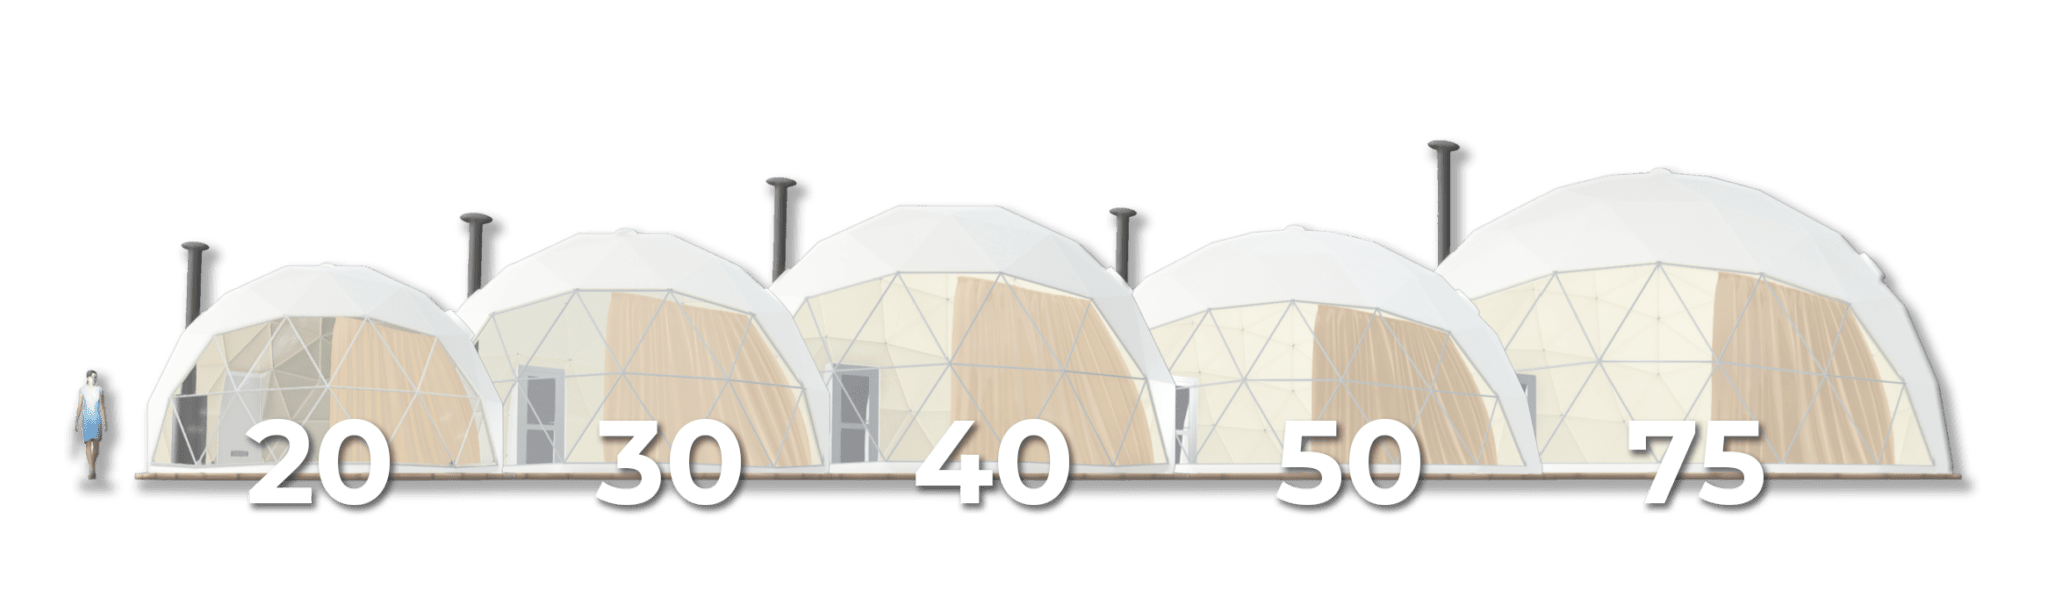 glamping size new5transparent3